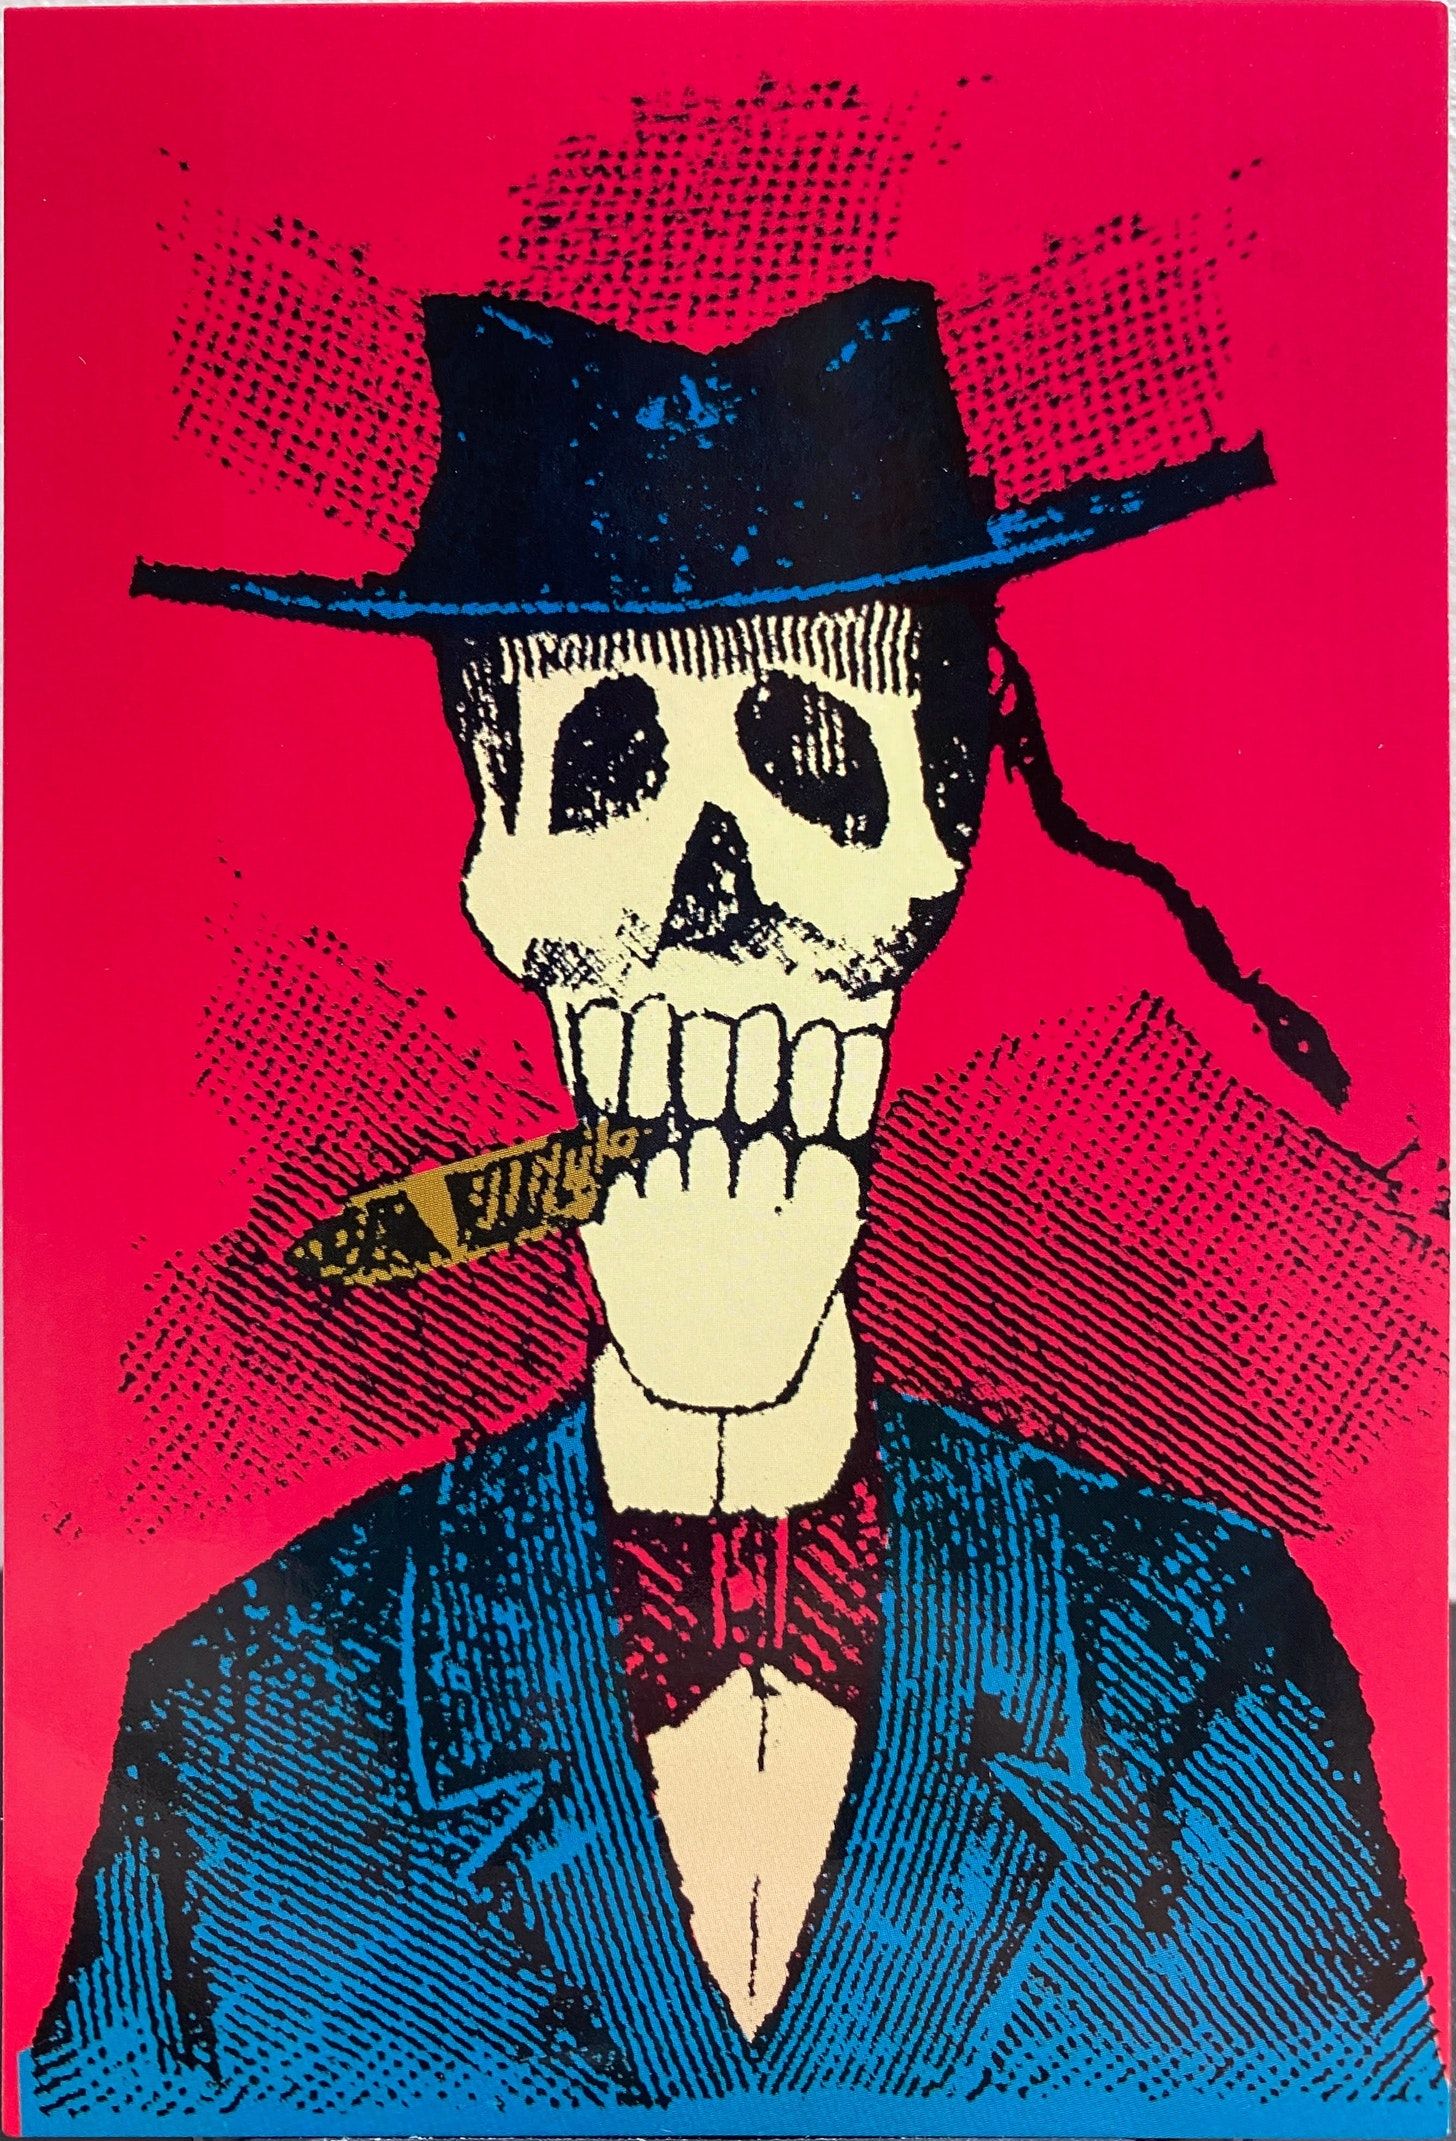 A skeleton as seen in a portrait, wearing a hat, an elegant jacket and a bowtie. It has a somber and sad look, with a cigar between their teeth.